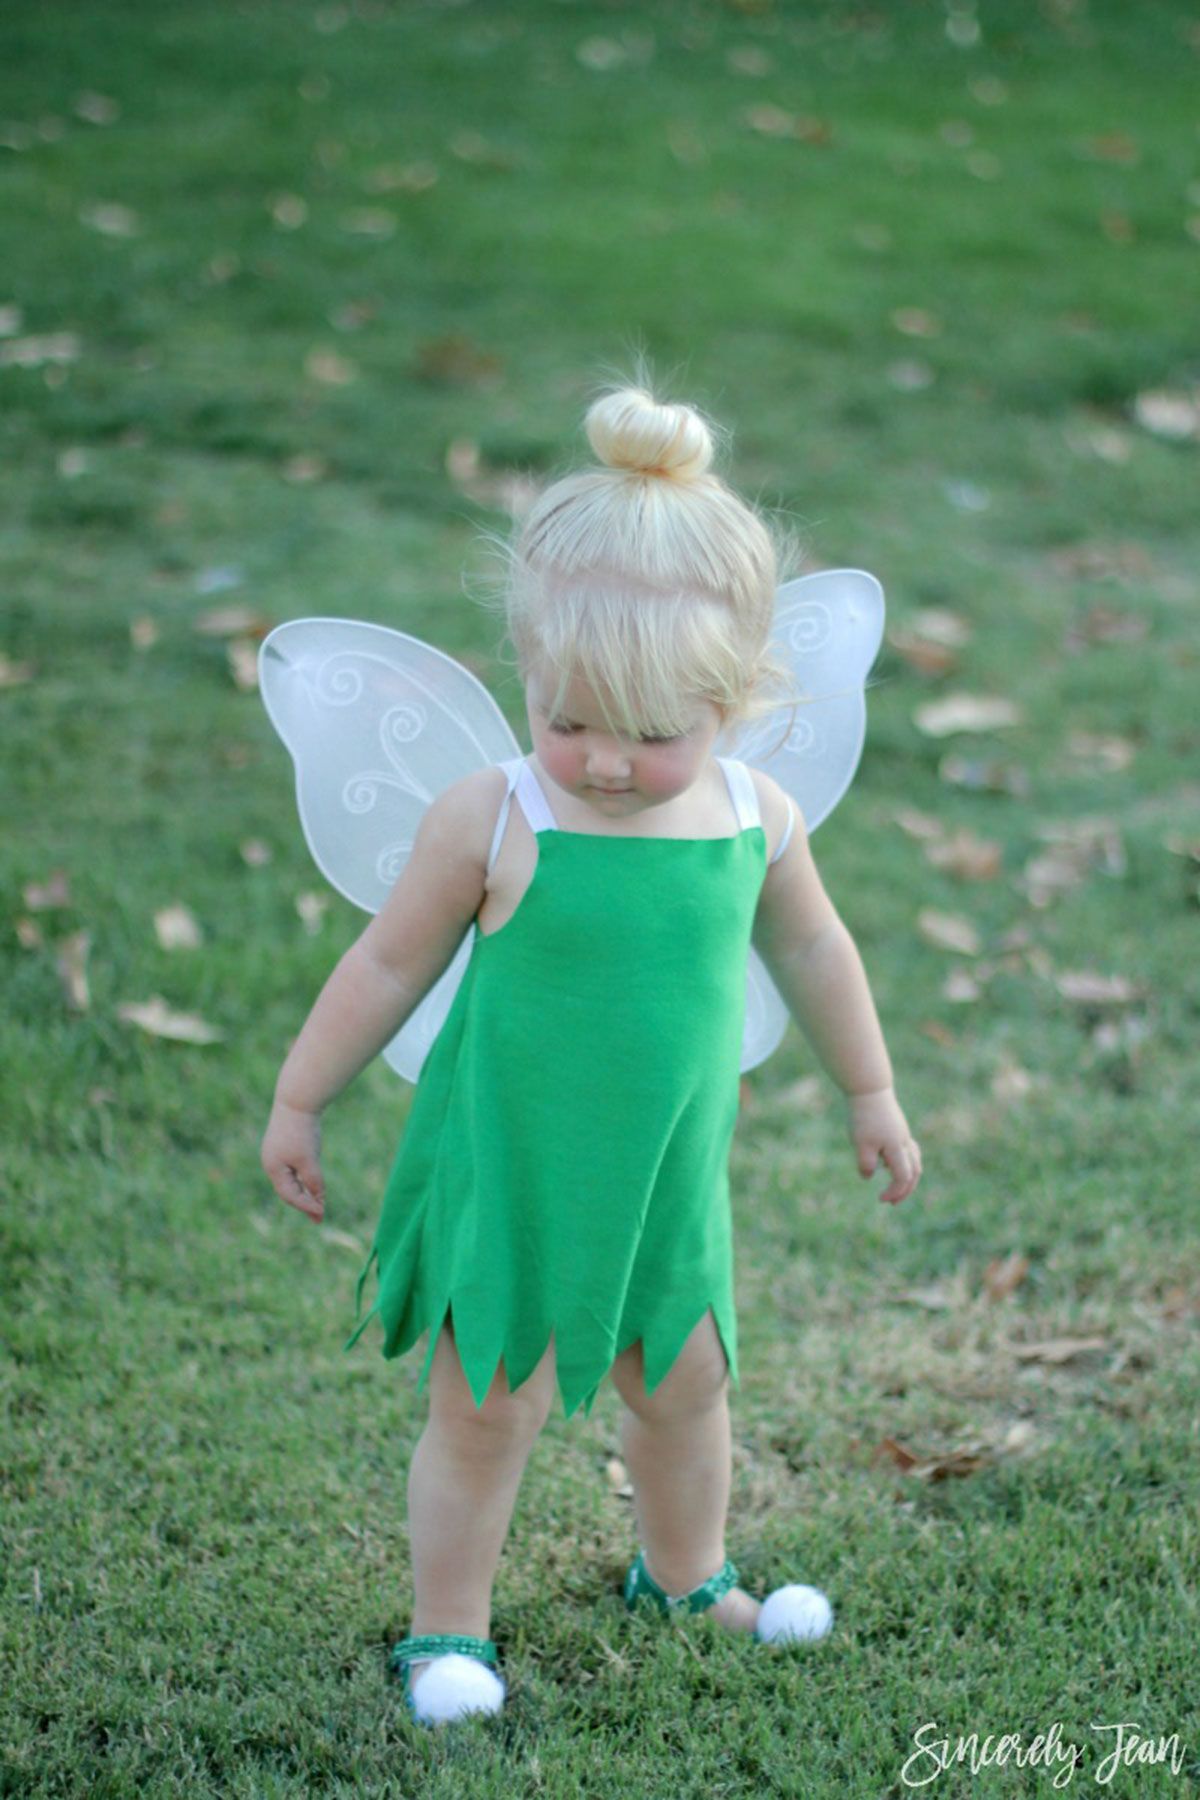 how to make a tinkerbell costume for teenagers